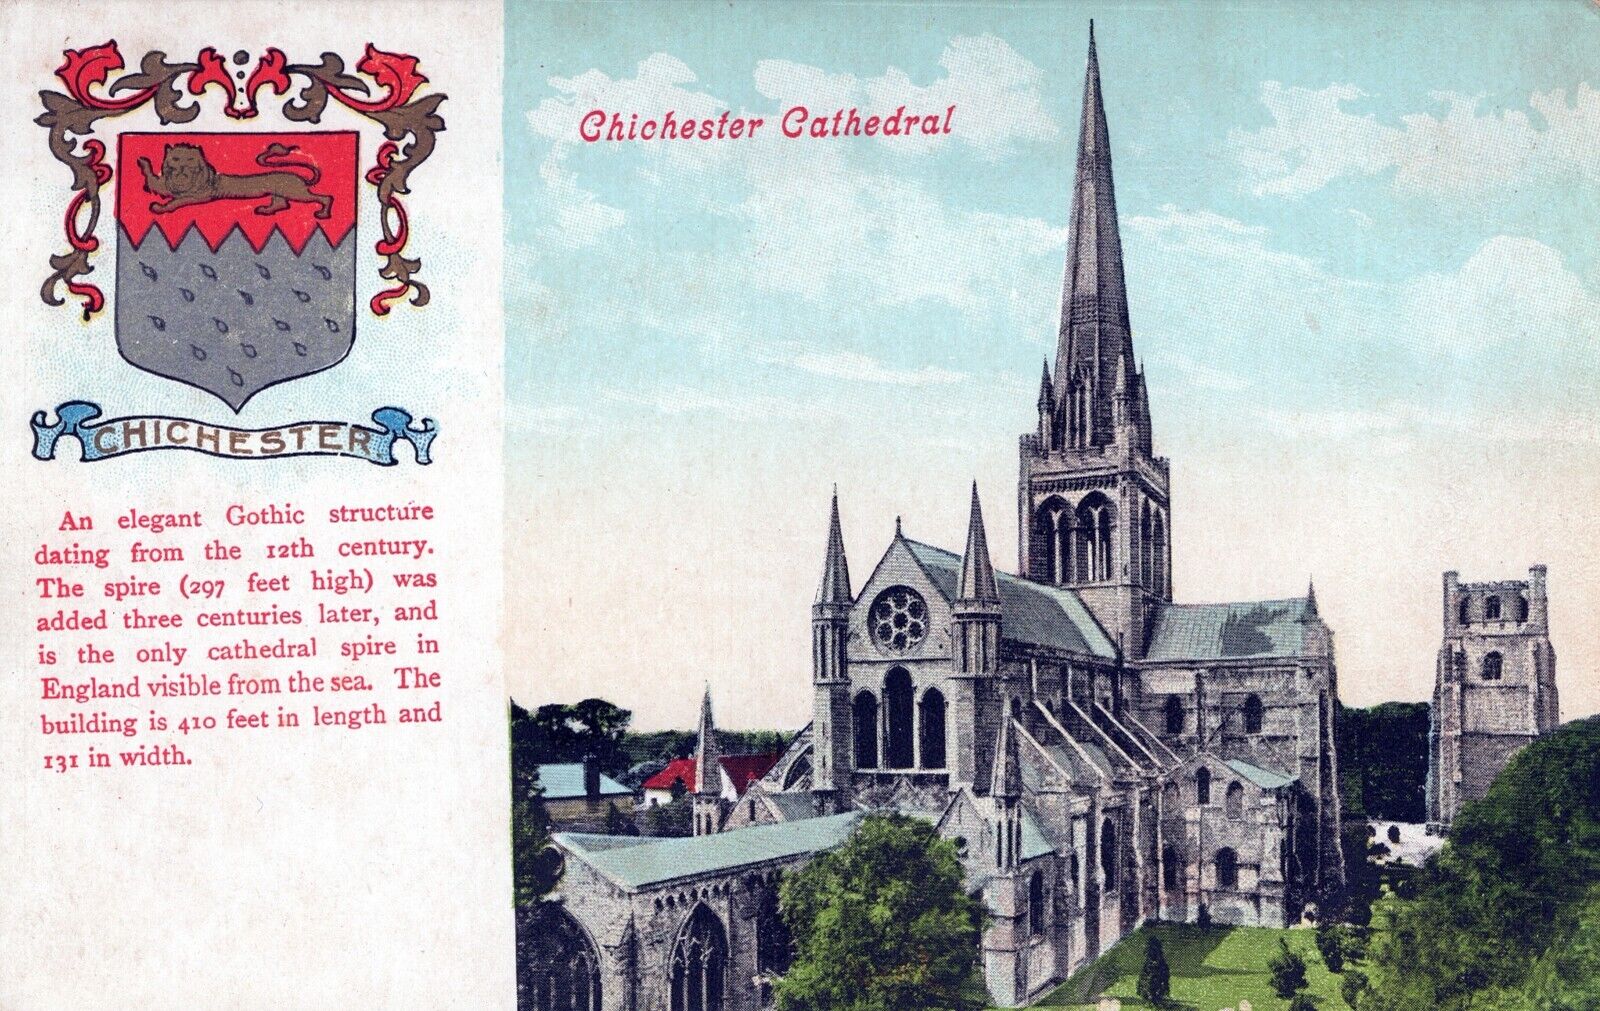 Lot of 2. Chichester & Exeter Cathedrals Unposted Postcards